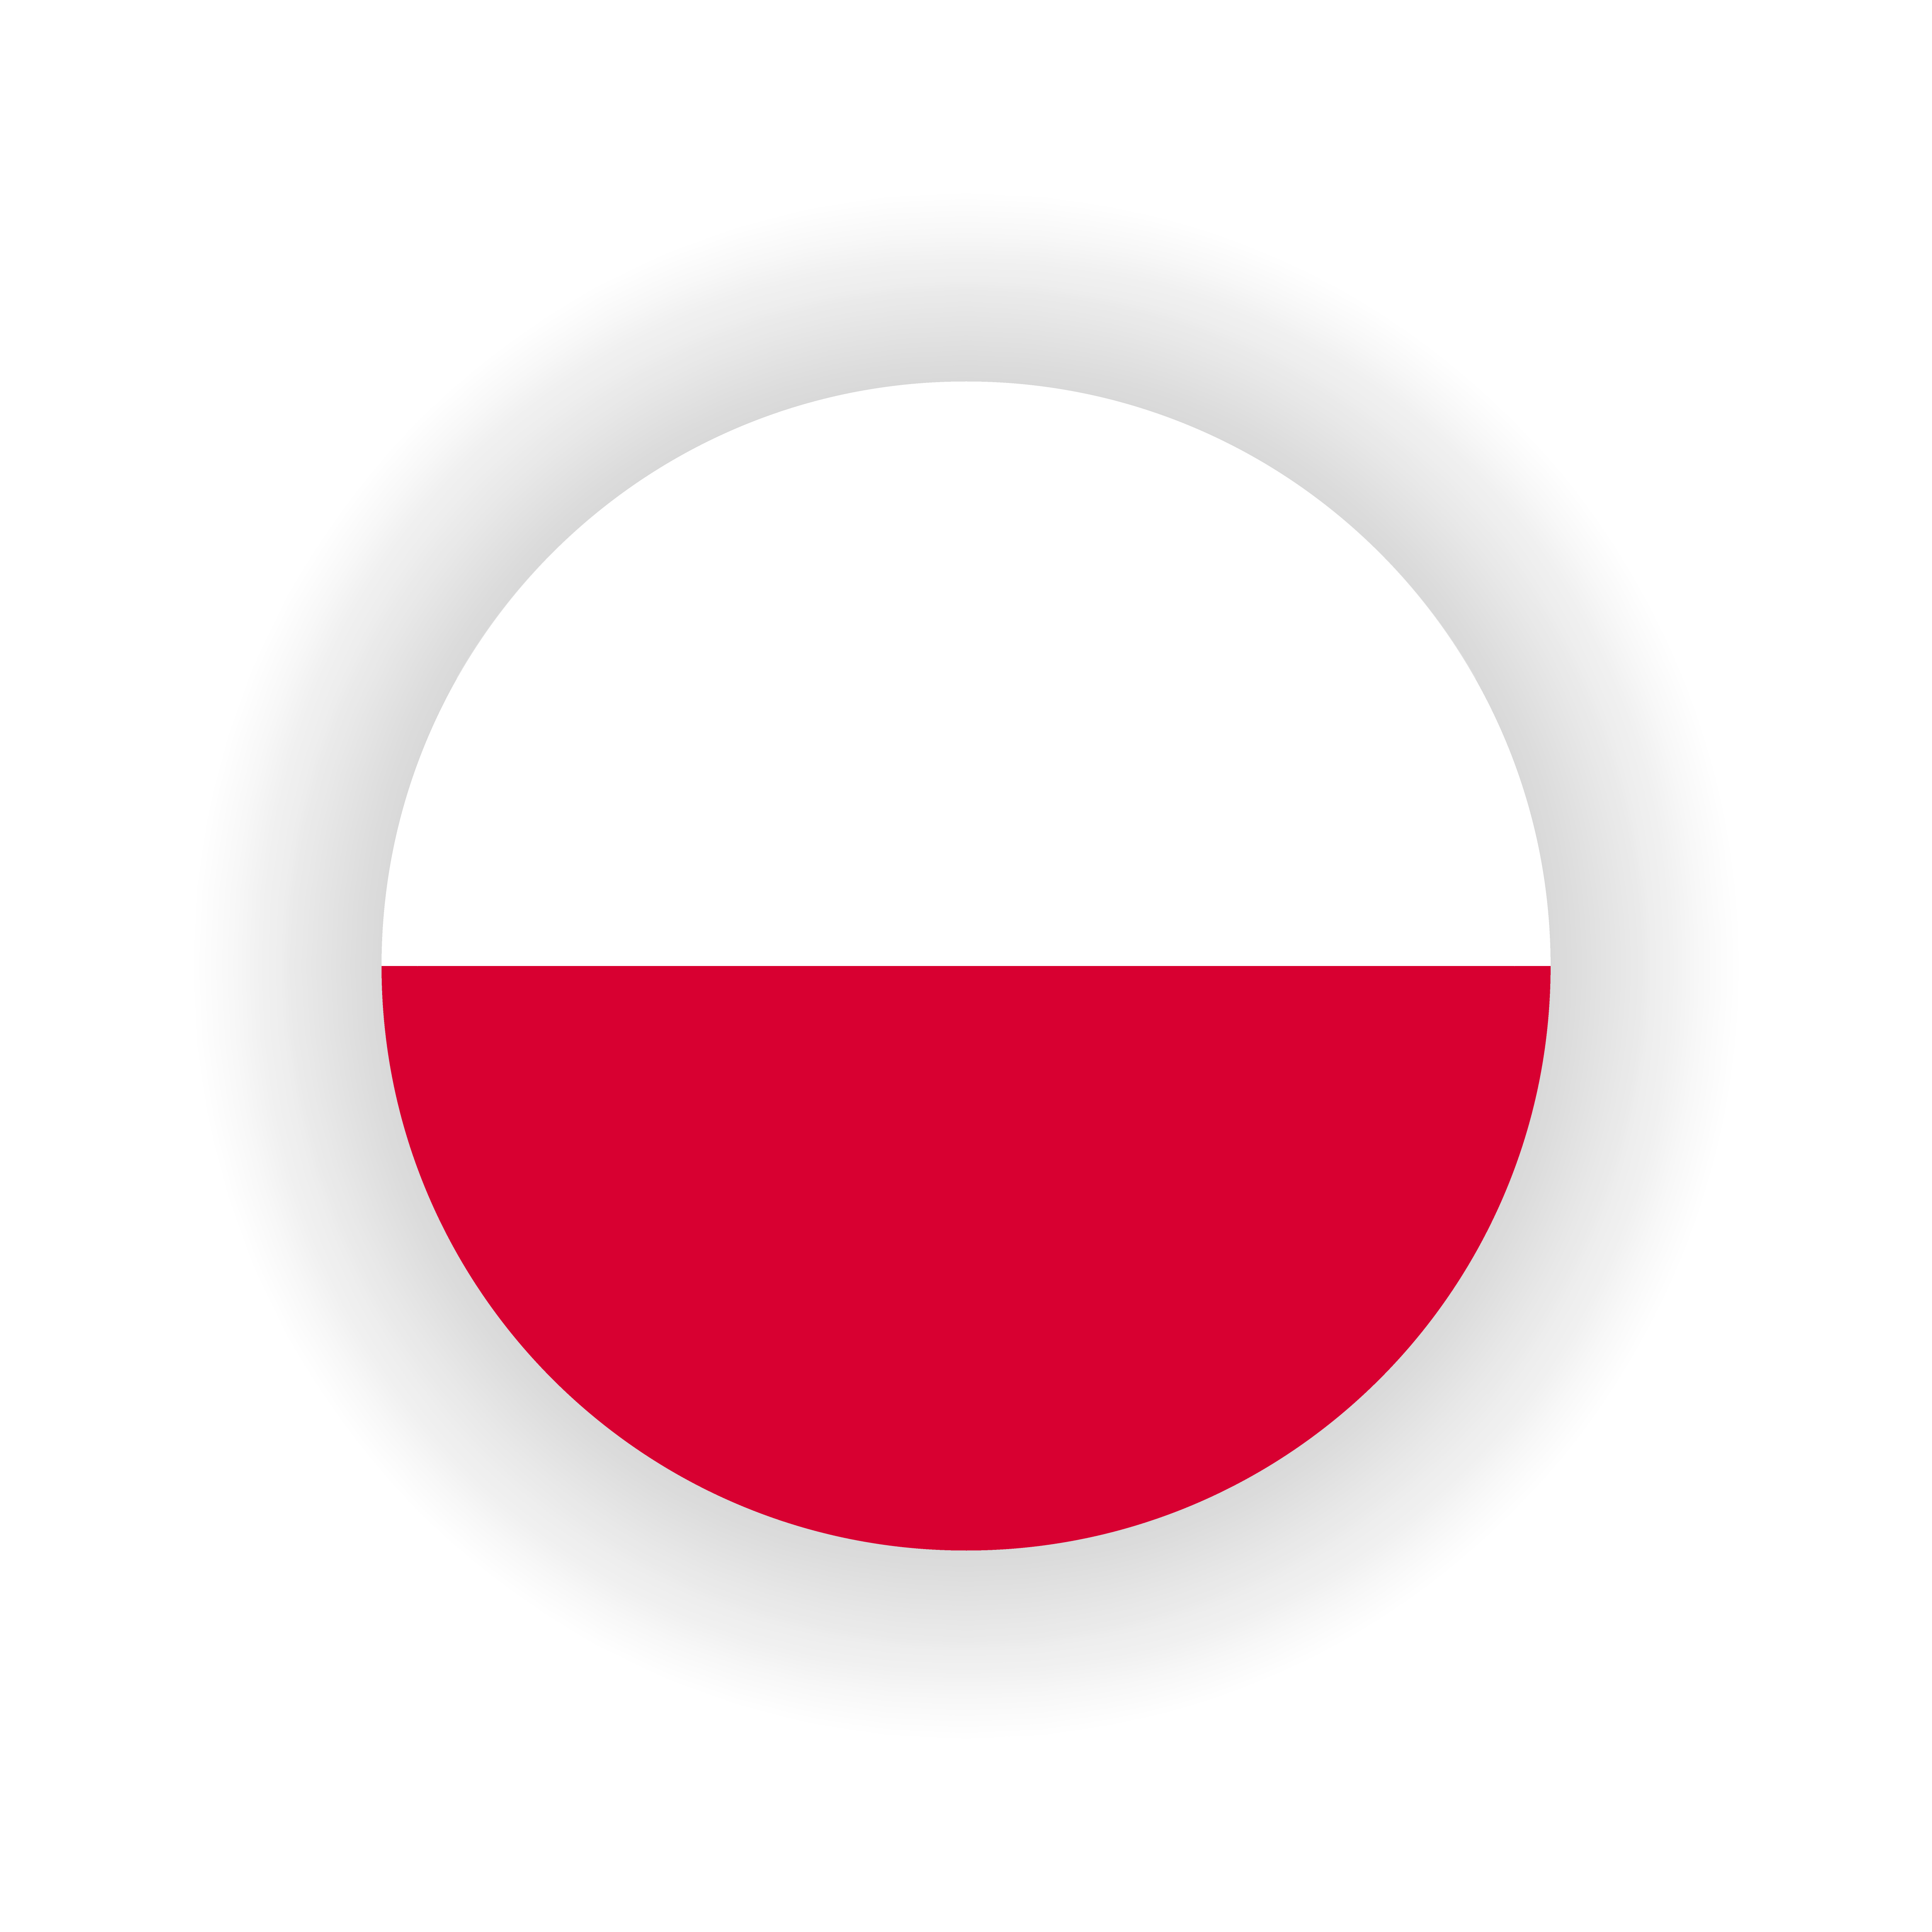 Pngtree—poland-icon-circle_5144311.png